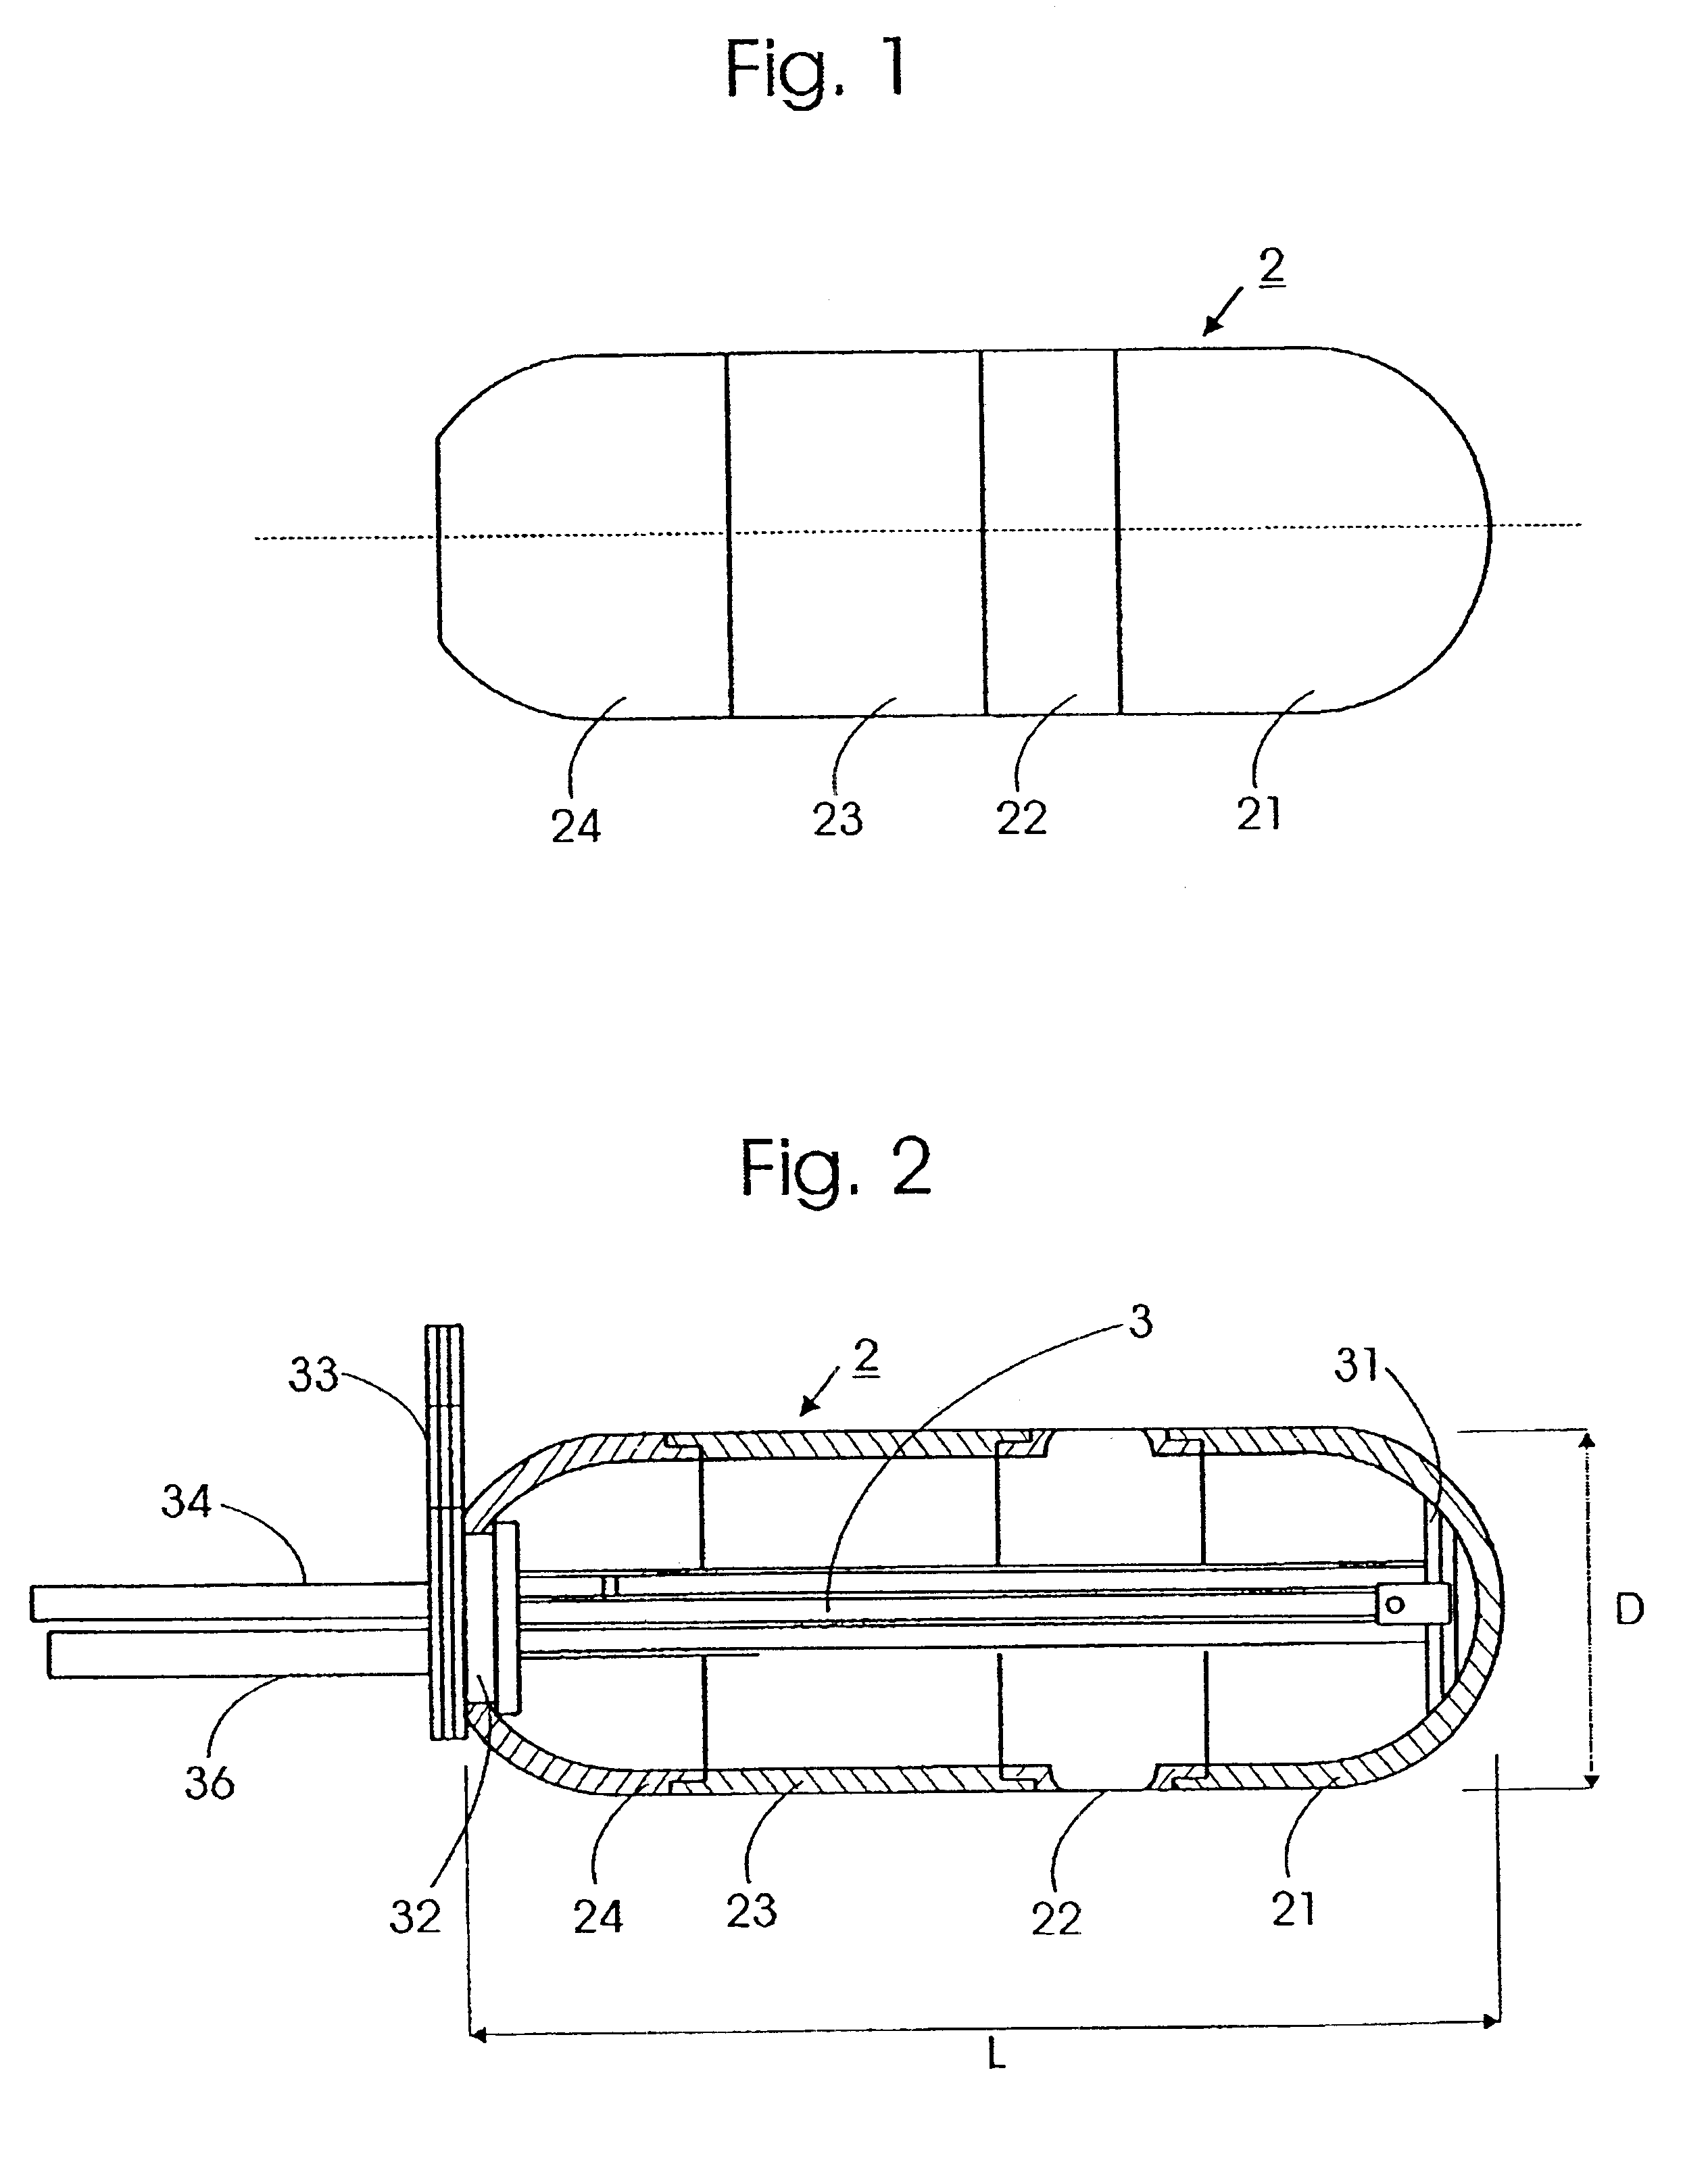 Body-cavity probe with body conformable member